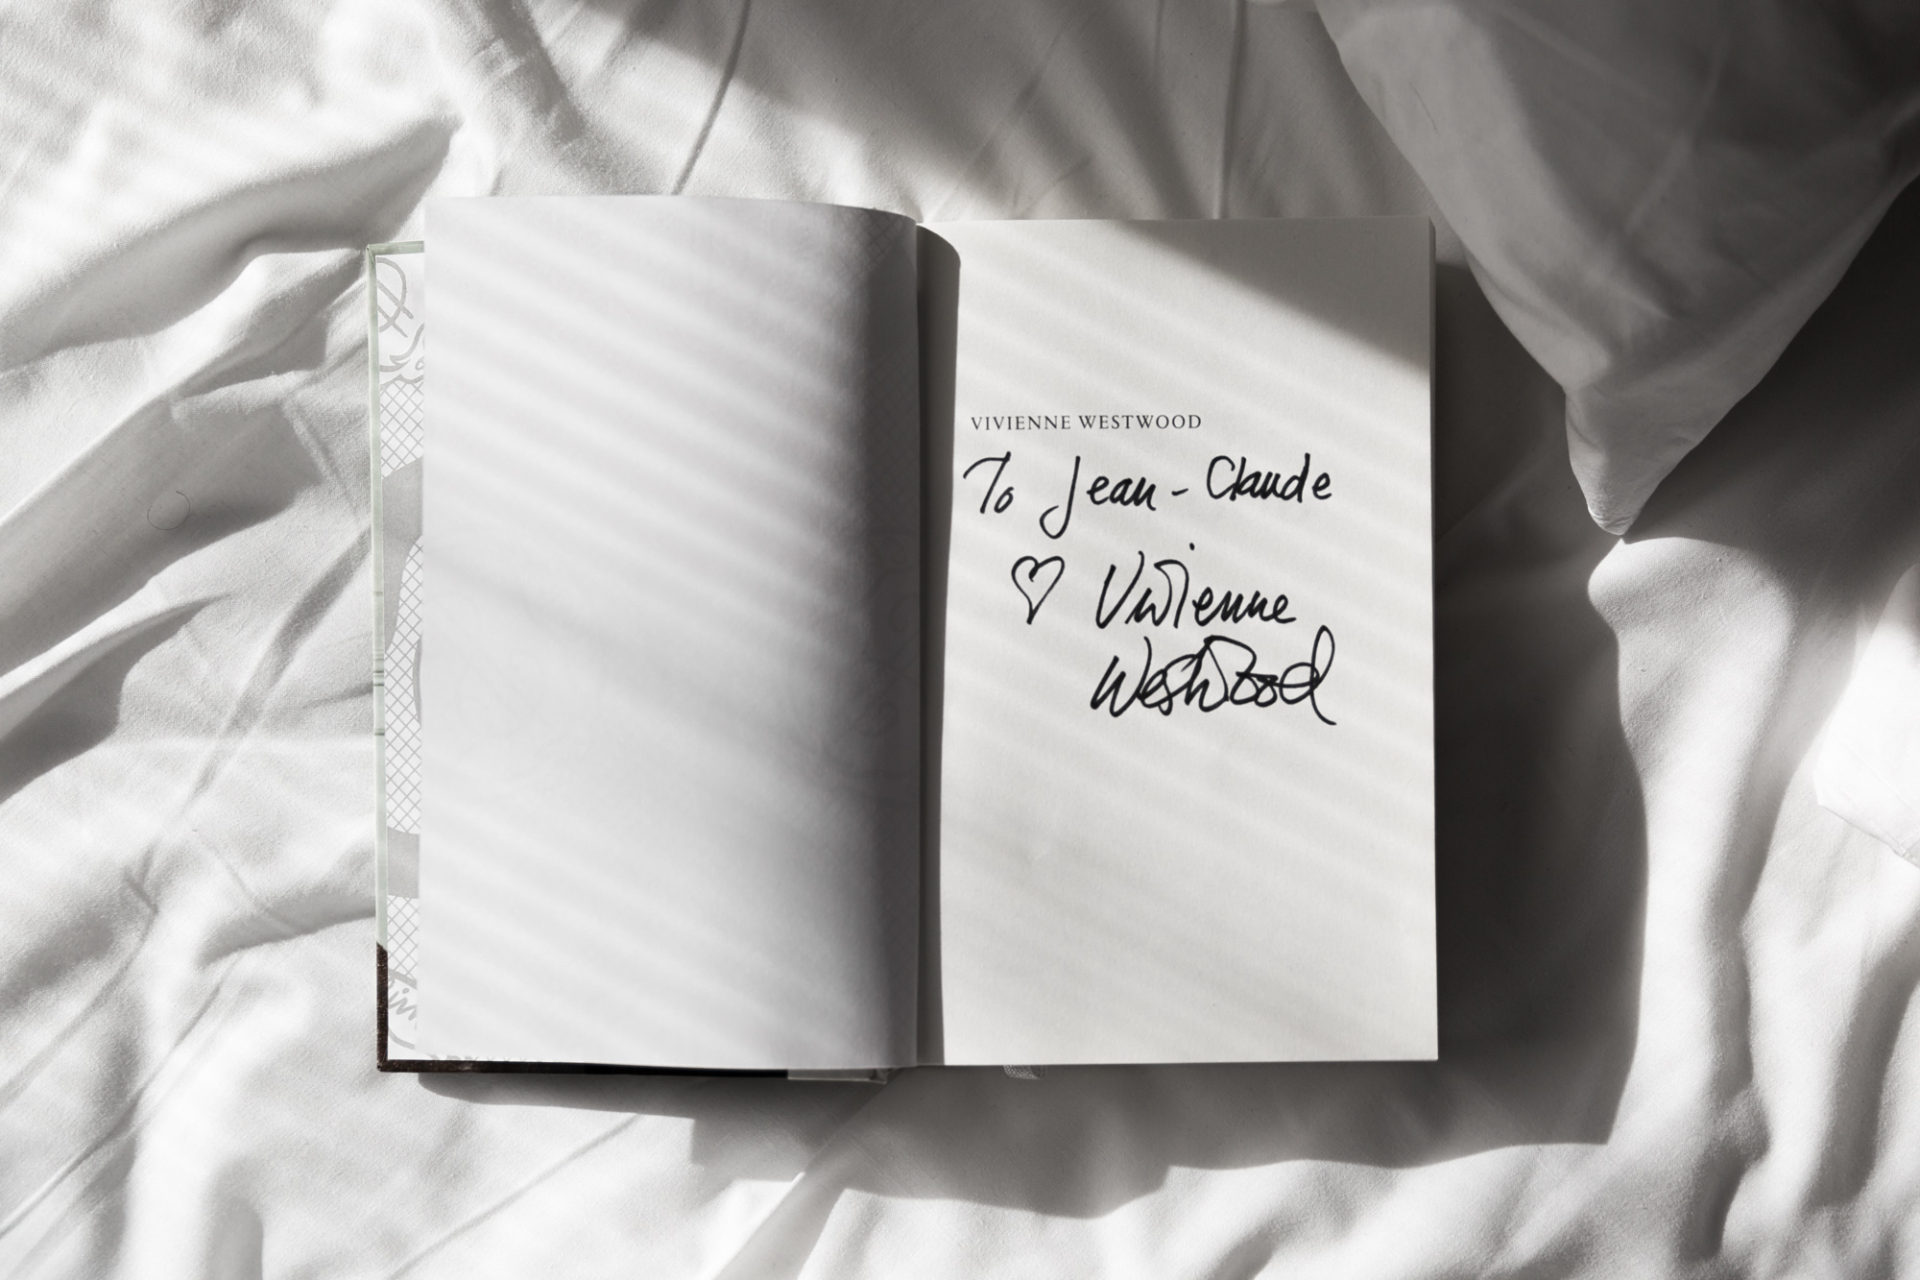 Signed autobiography of Vivienne Westwood